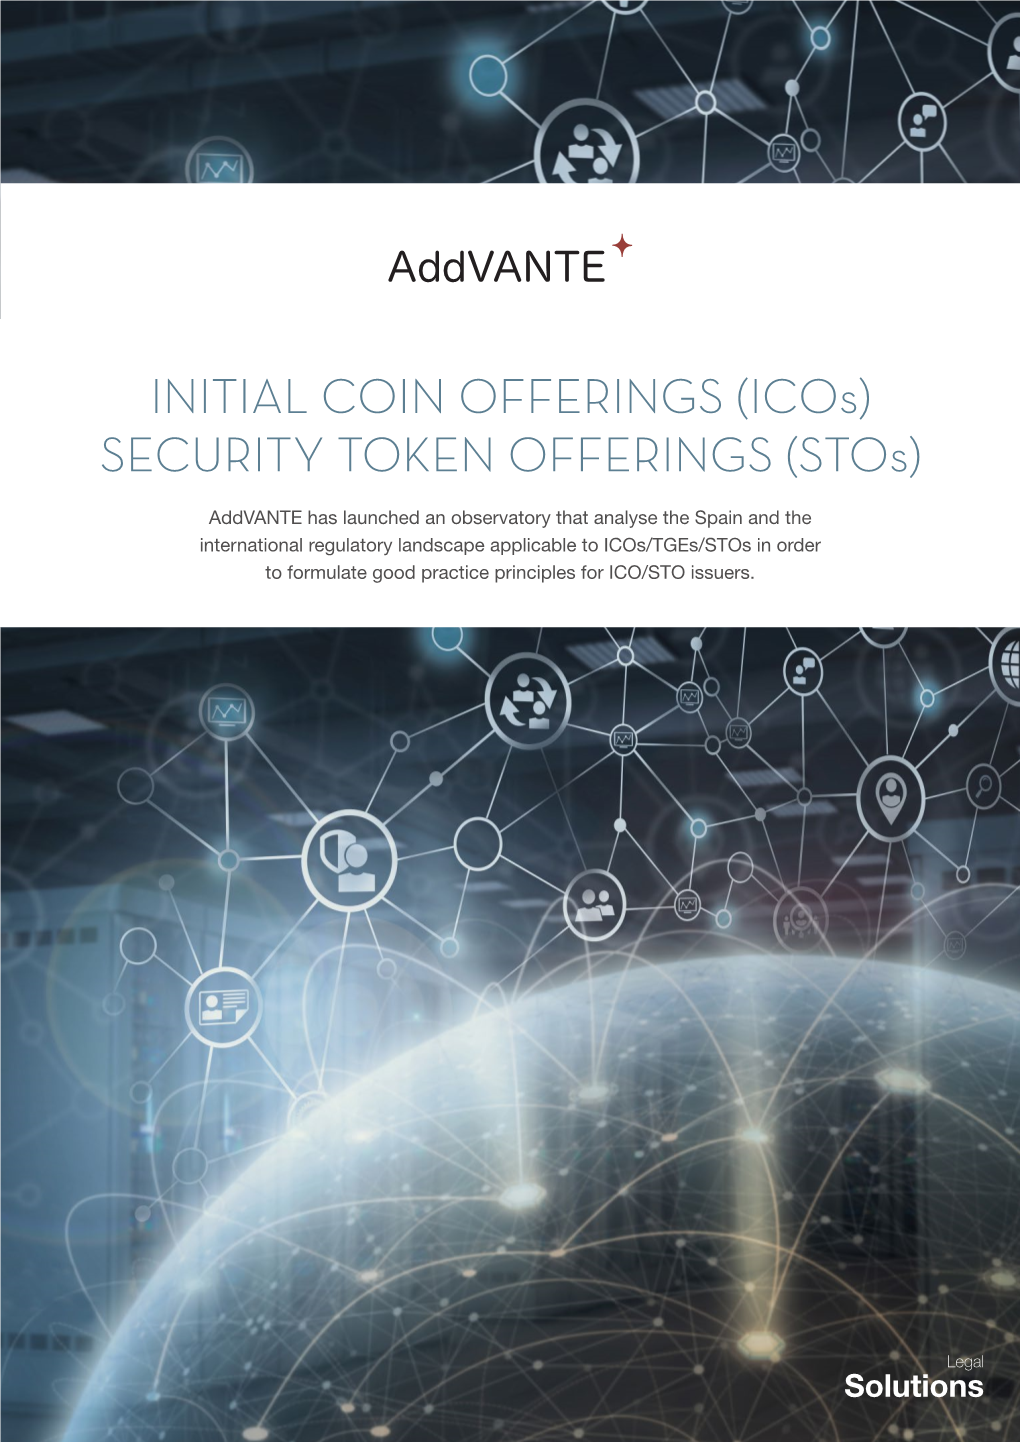 INITIAL COIN OFFERINGS (Icos) SECURITY TOKEN OFFERINGS (Stos)